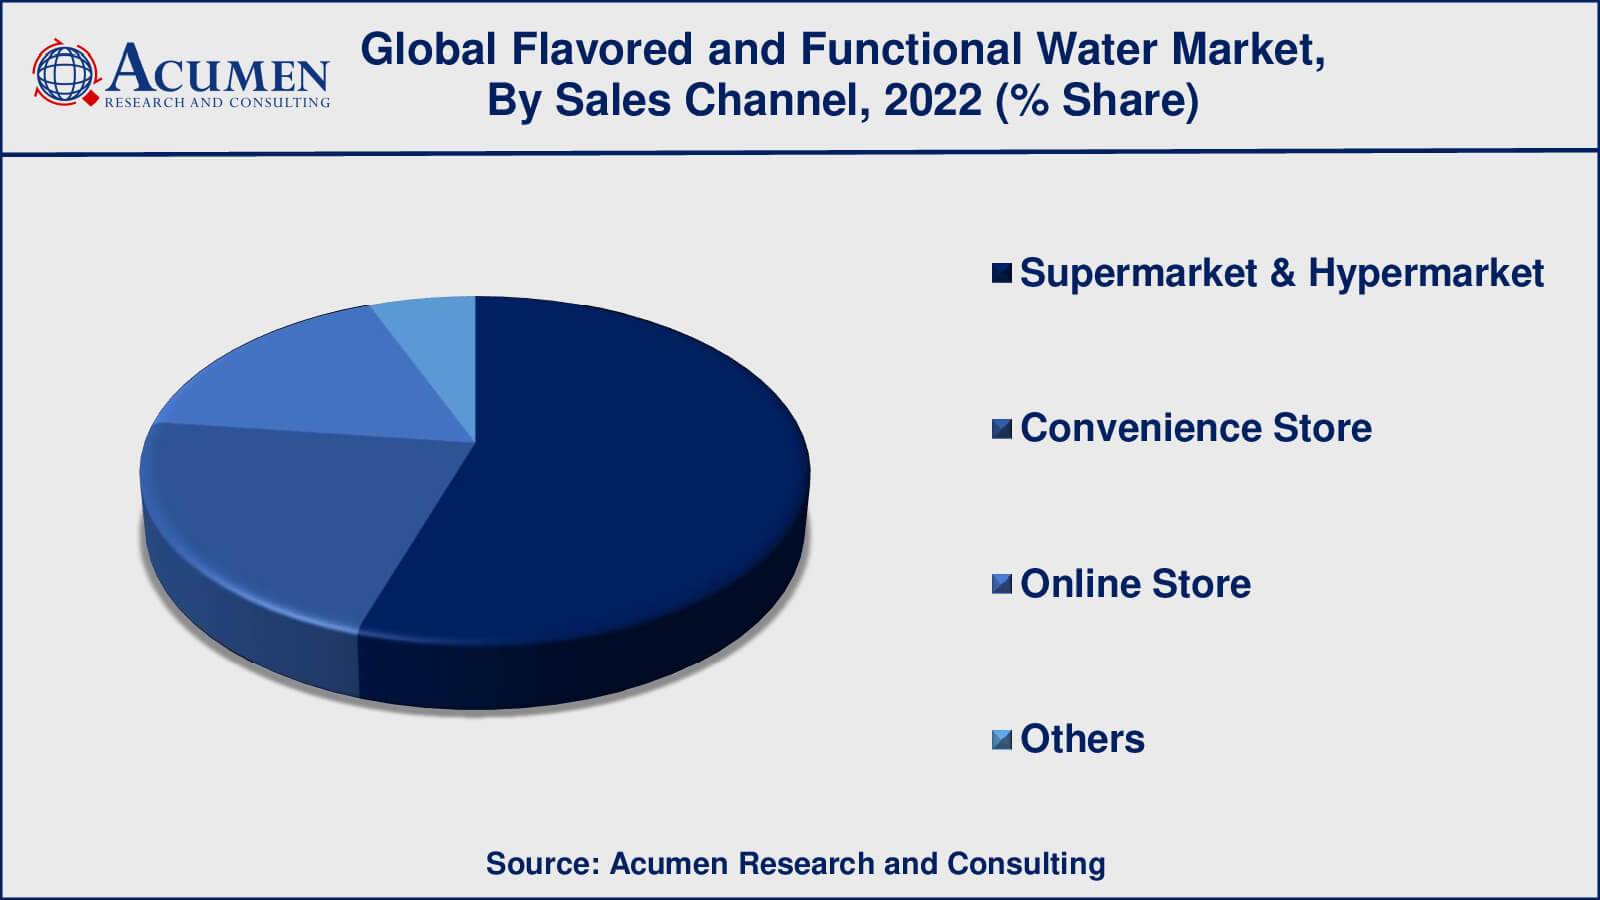 Flavored and Functional Water Market Drivers